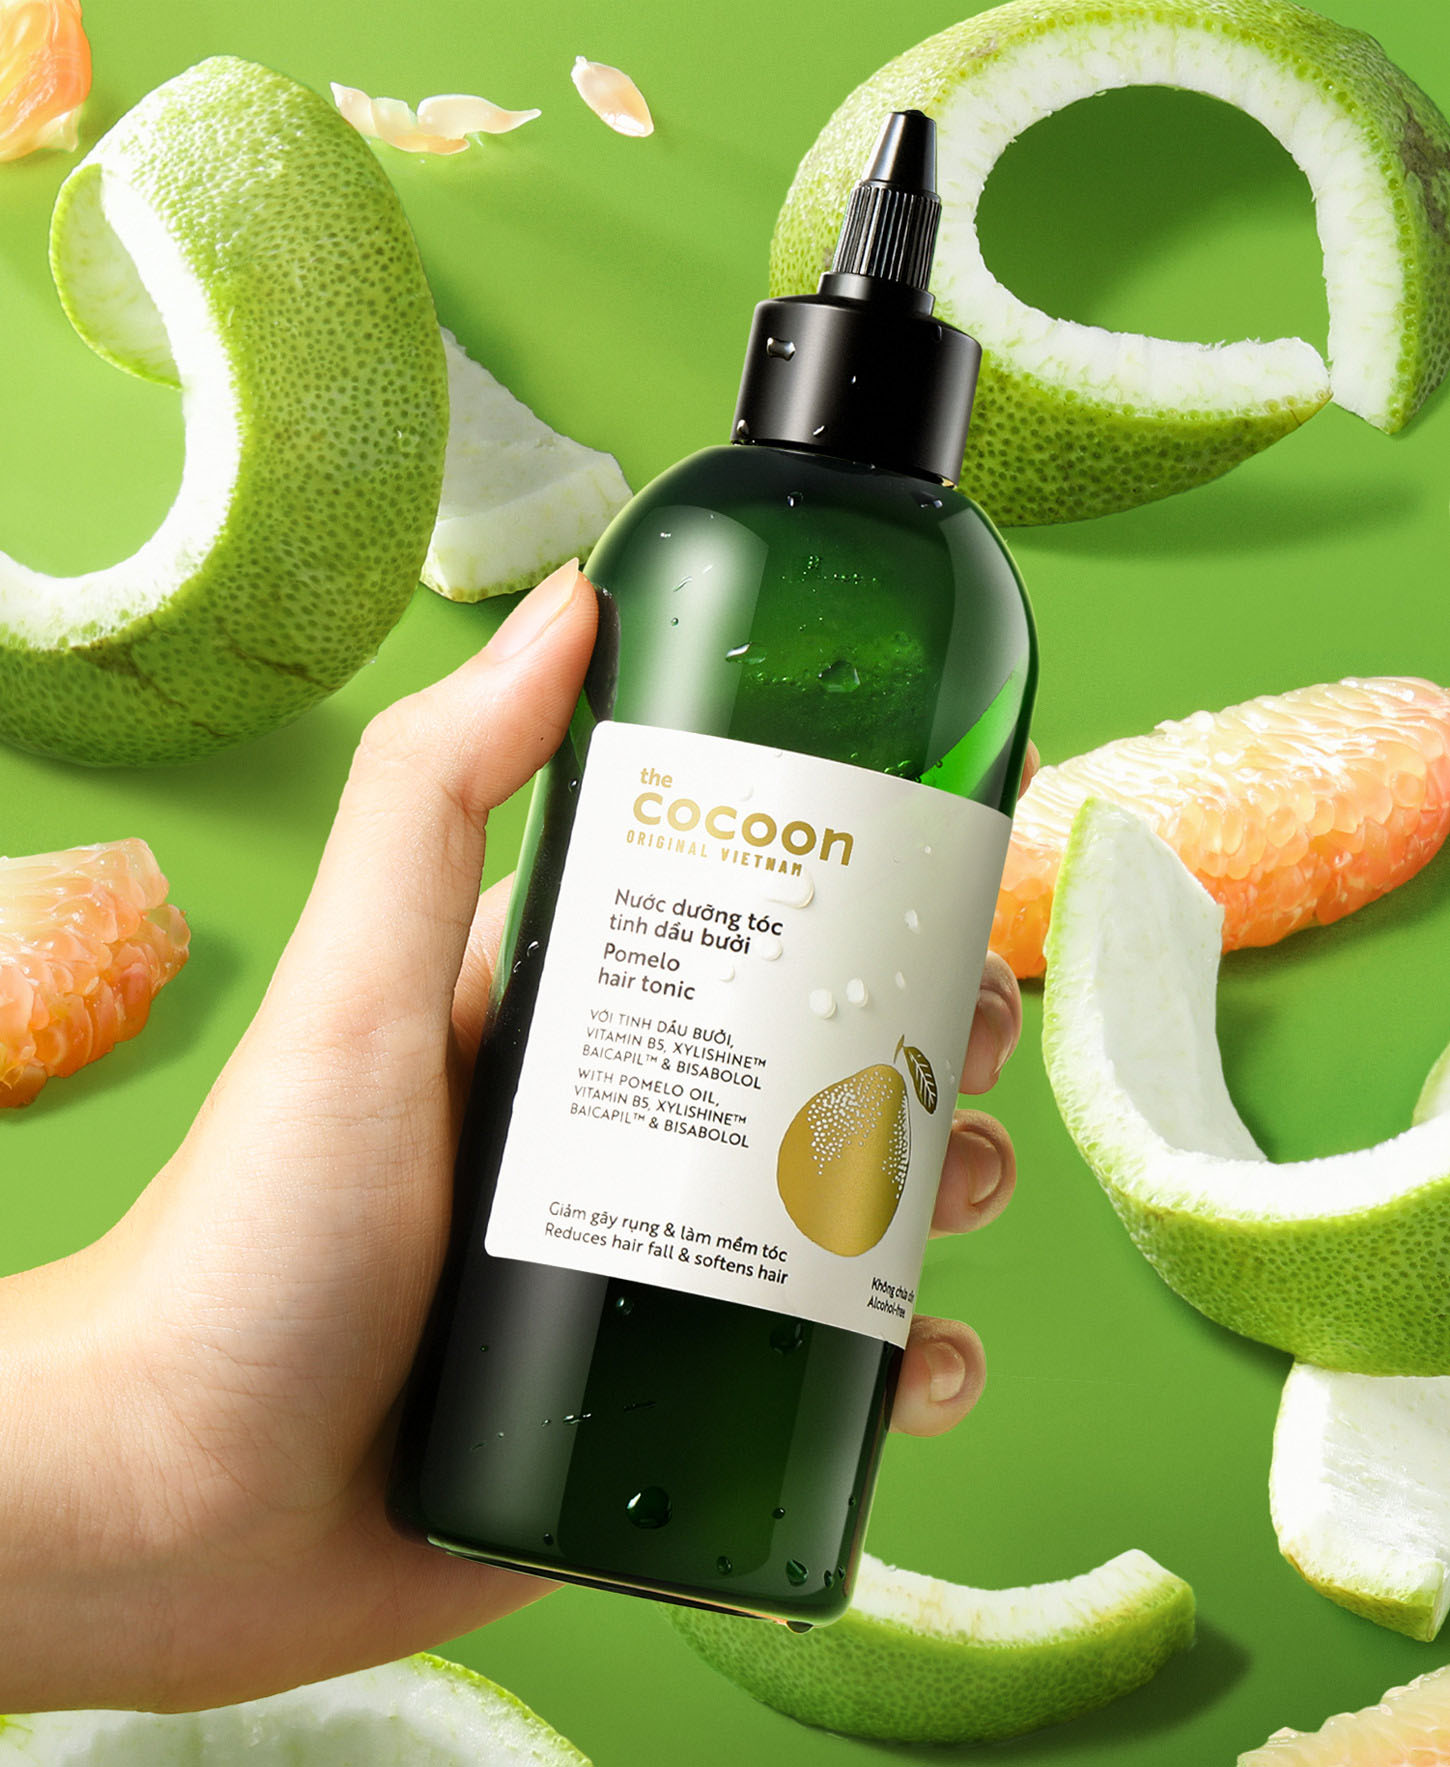 Cocoon Pomelo Hair Tonic